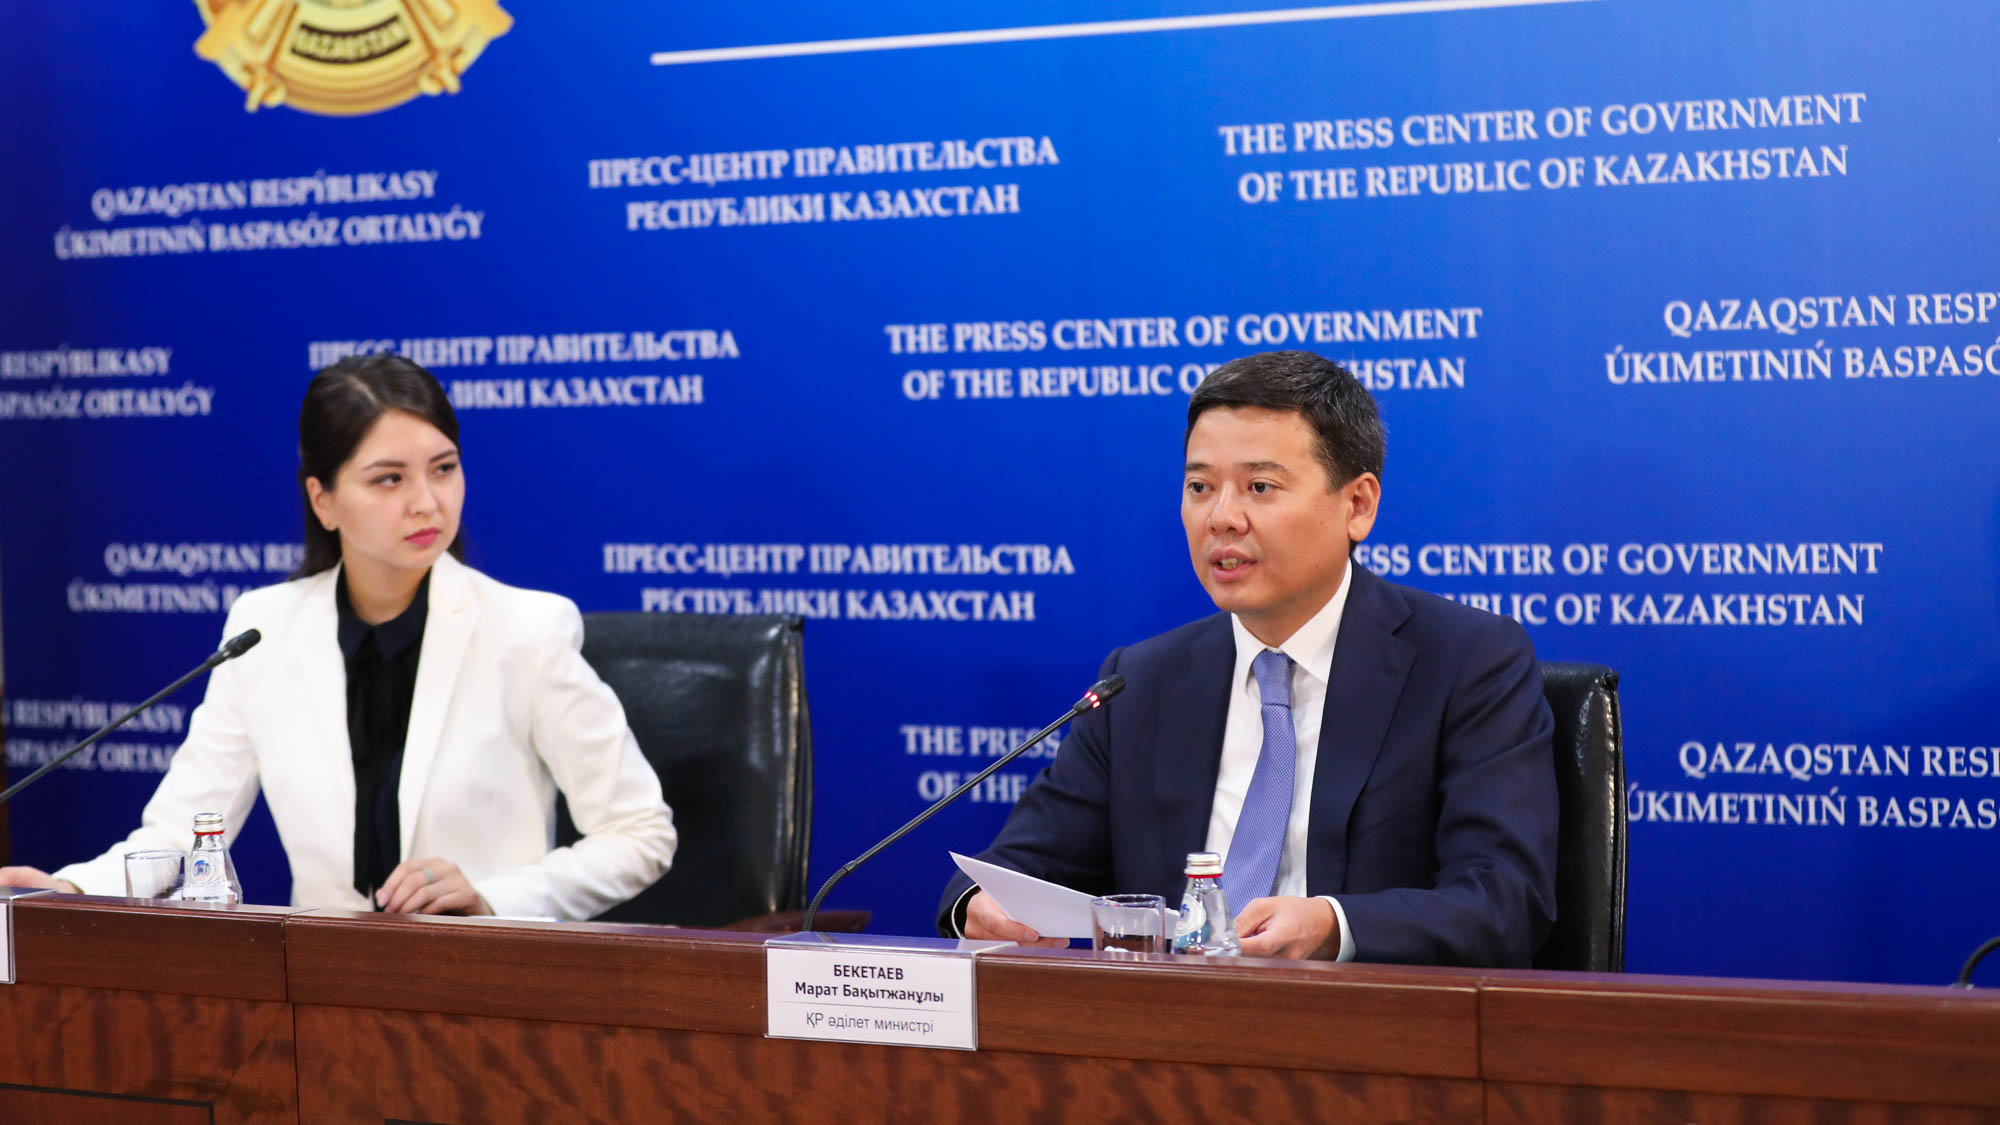 Six bills will be submitted to the Parliament of Kazakhstan in September — Marat Beketayev